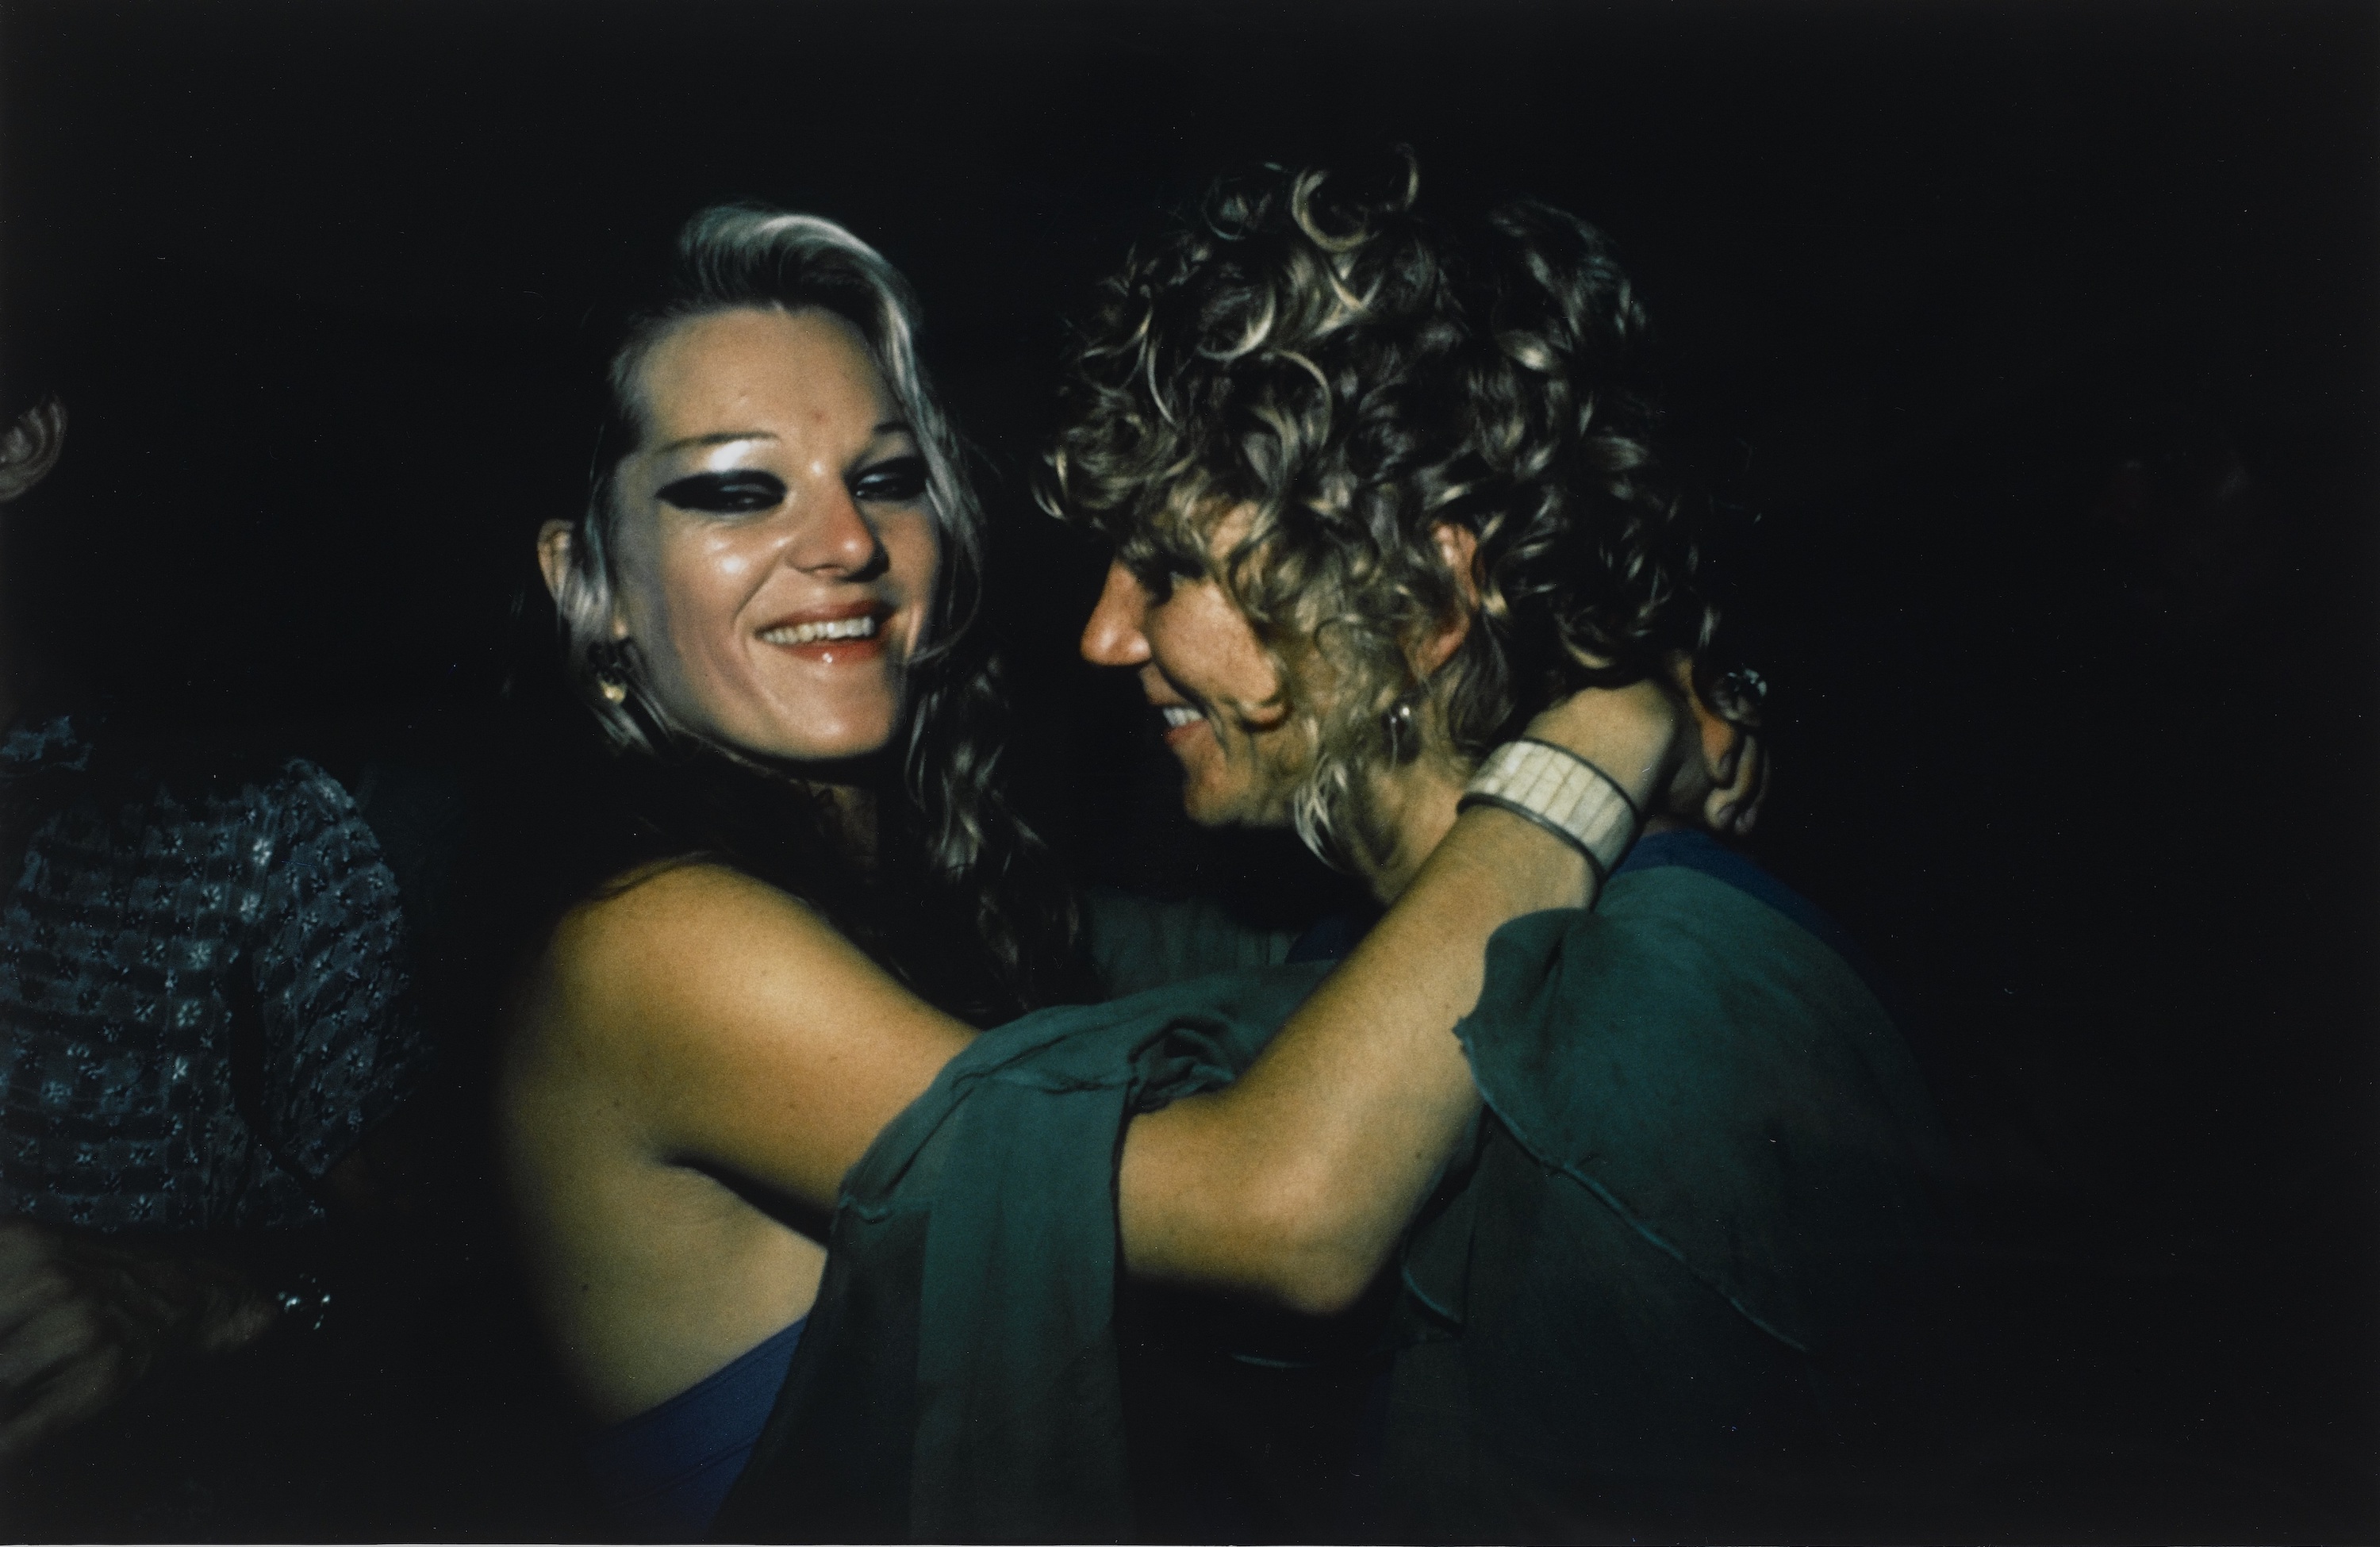 Cookie and Sharon Dancing in the Back Room. Provincetown, MA, 1976 by Nan Goldin - 1976 Stedelijk Museum